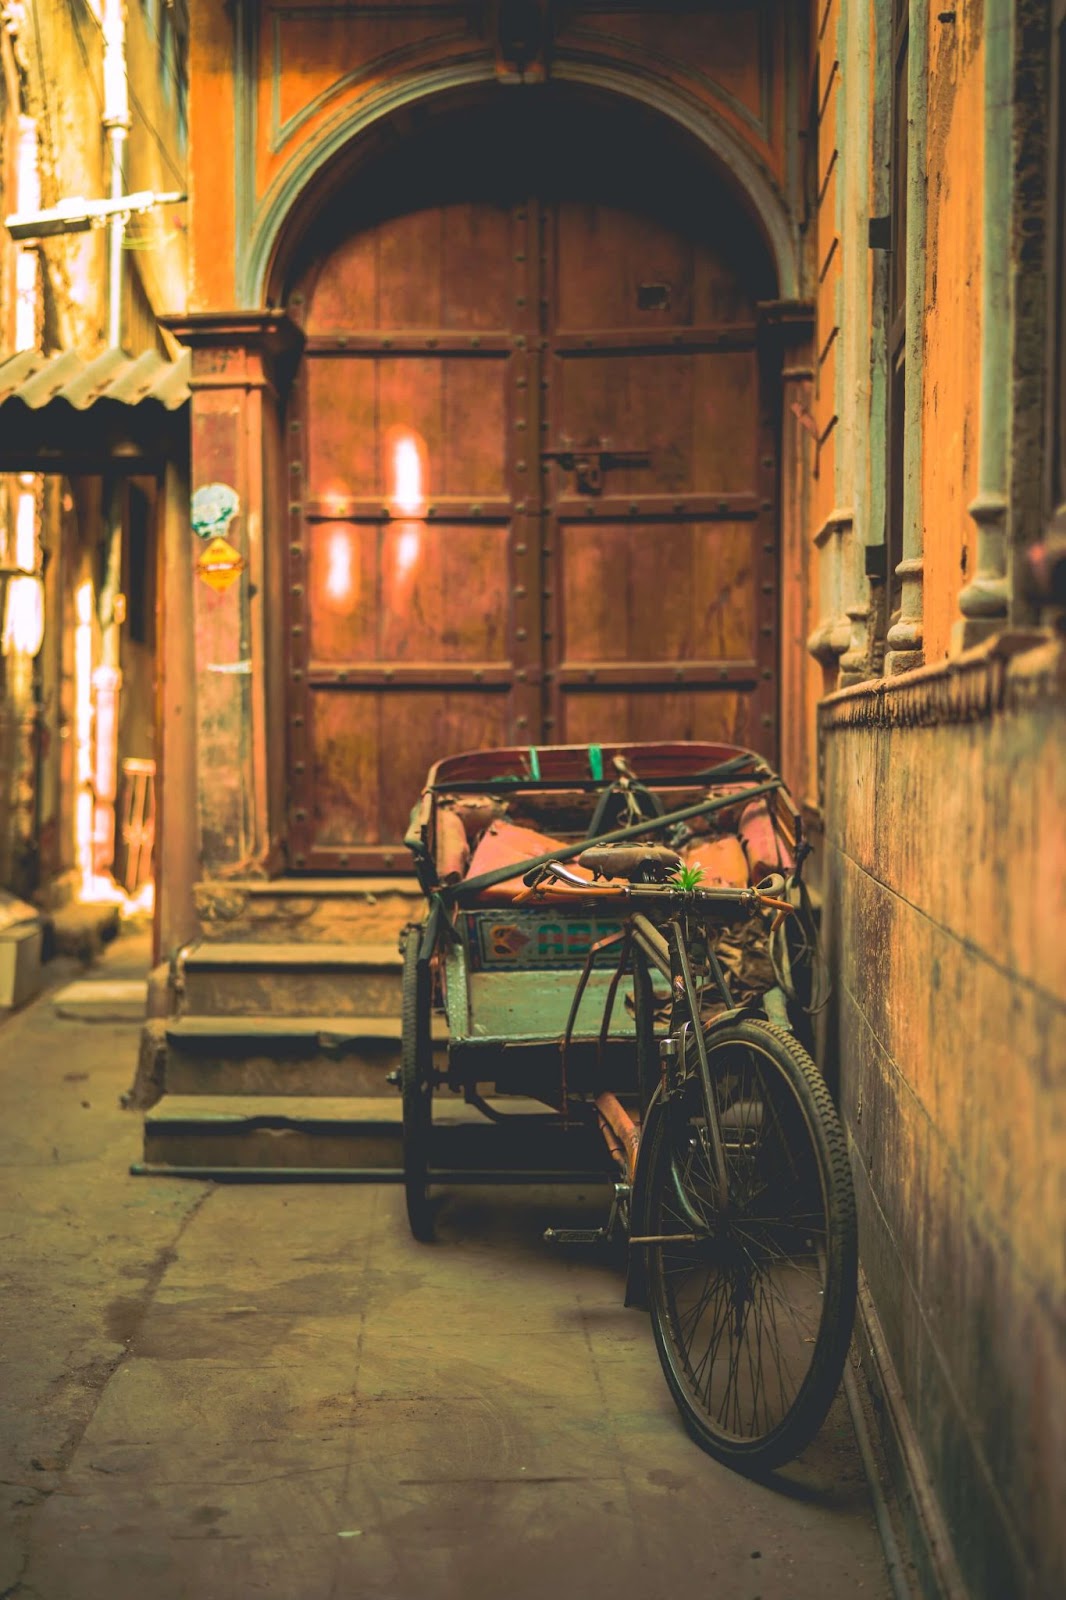 1 day in Delhi. This is an image of a bicycle against a wooden door at Chandni Chowk.